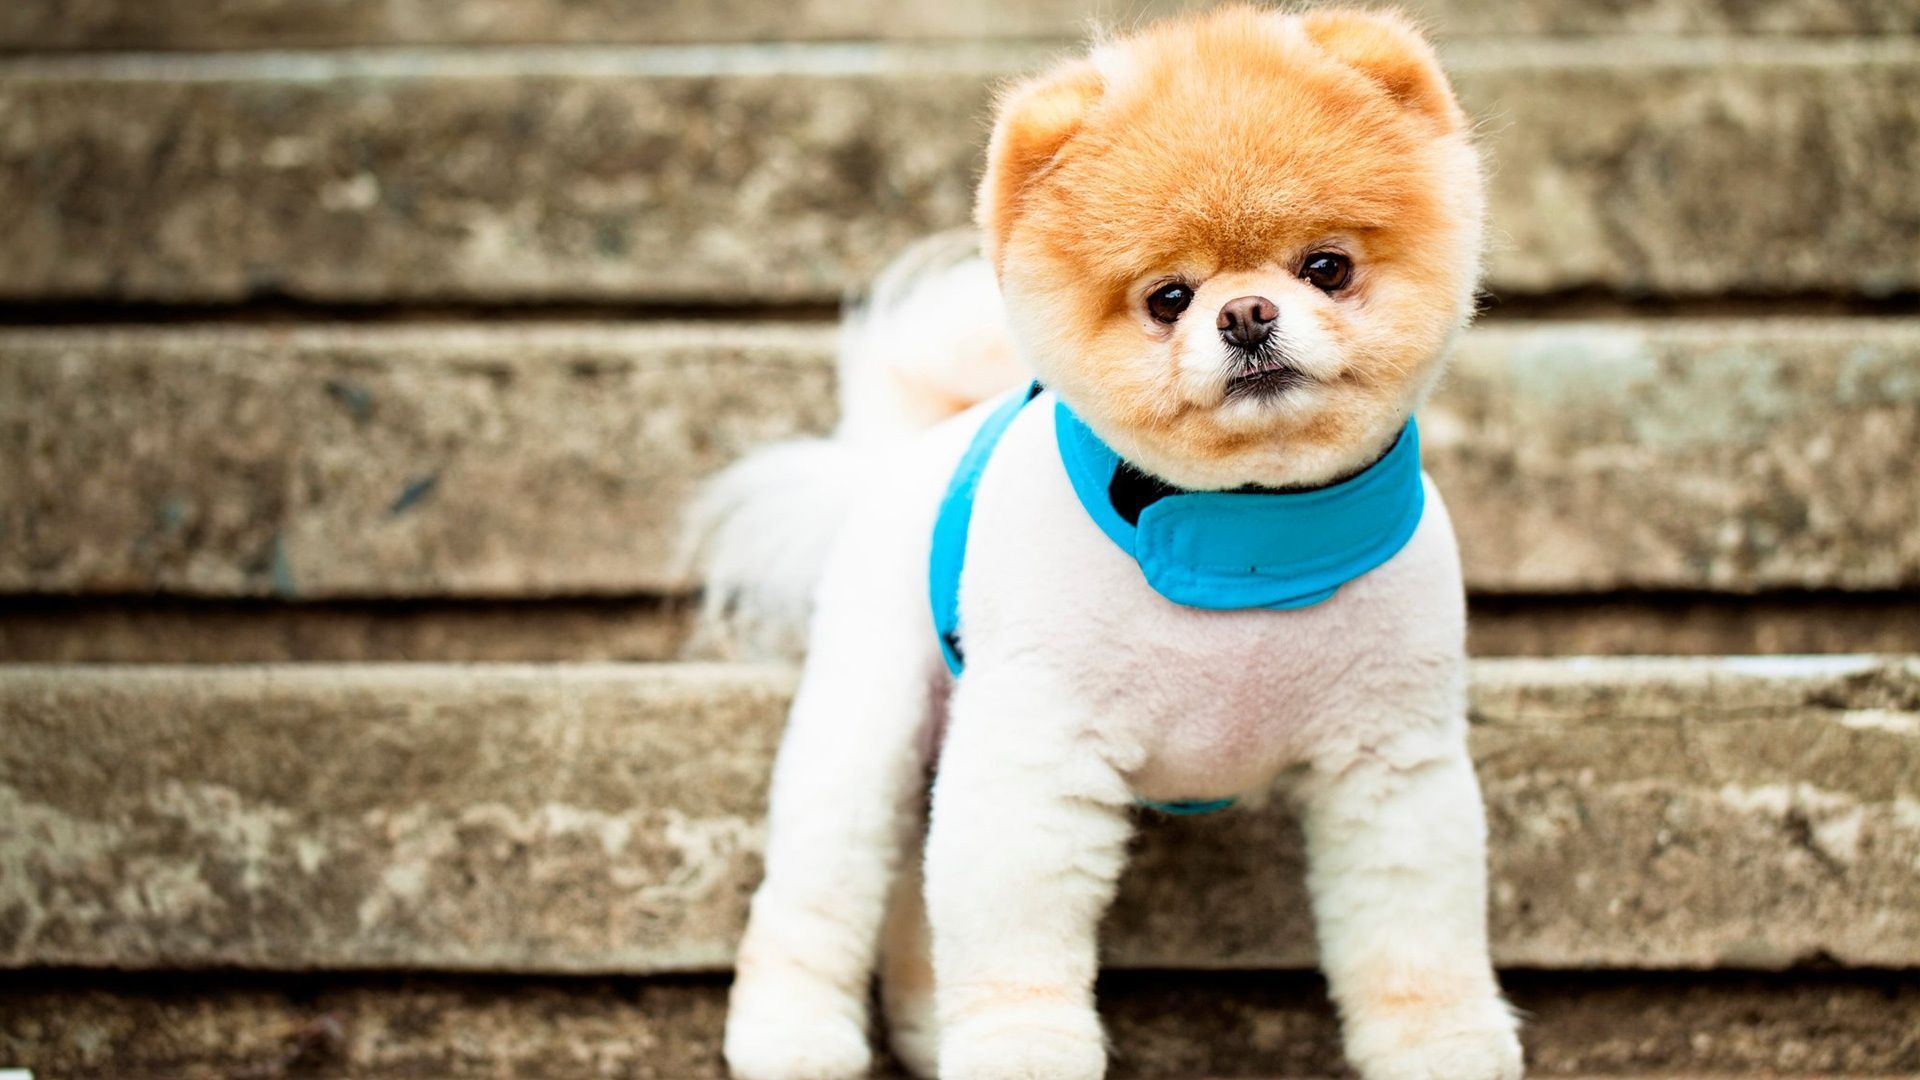 boo the cutest dog wallpaper free download. Cute dog wallpaper